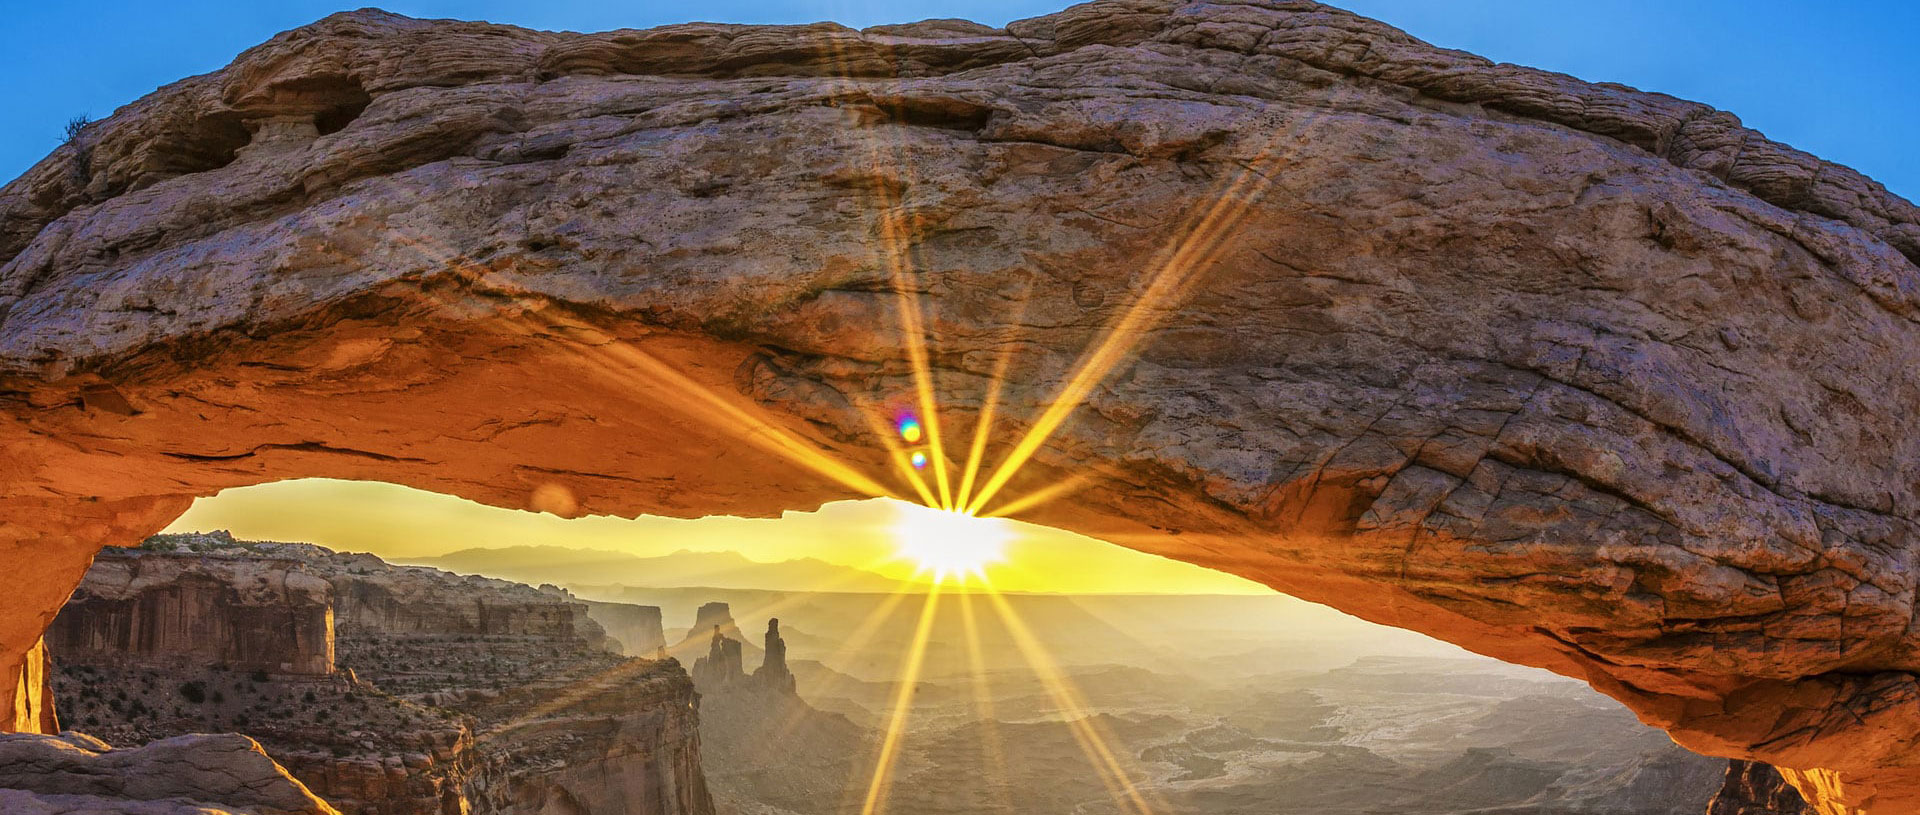 The underside of a naturally formed sandstone arch framing the view of sandstone cliffs, valleys and brilliant sunset at Arches National Park in Moab, Utah.